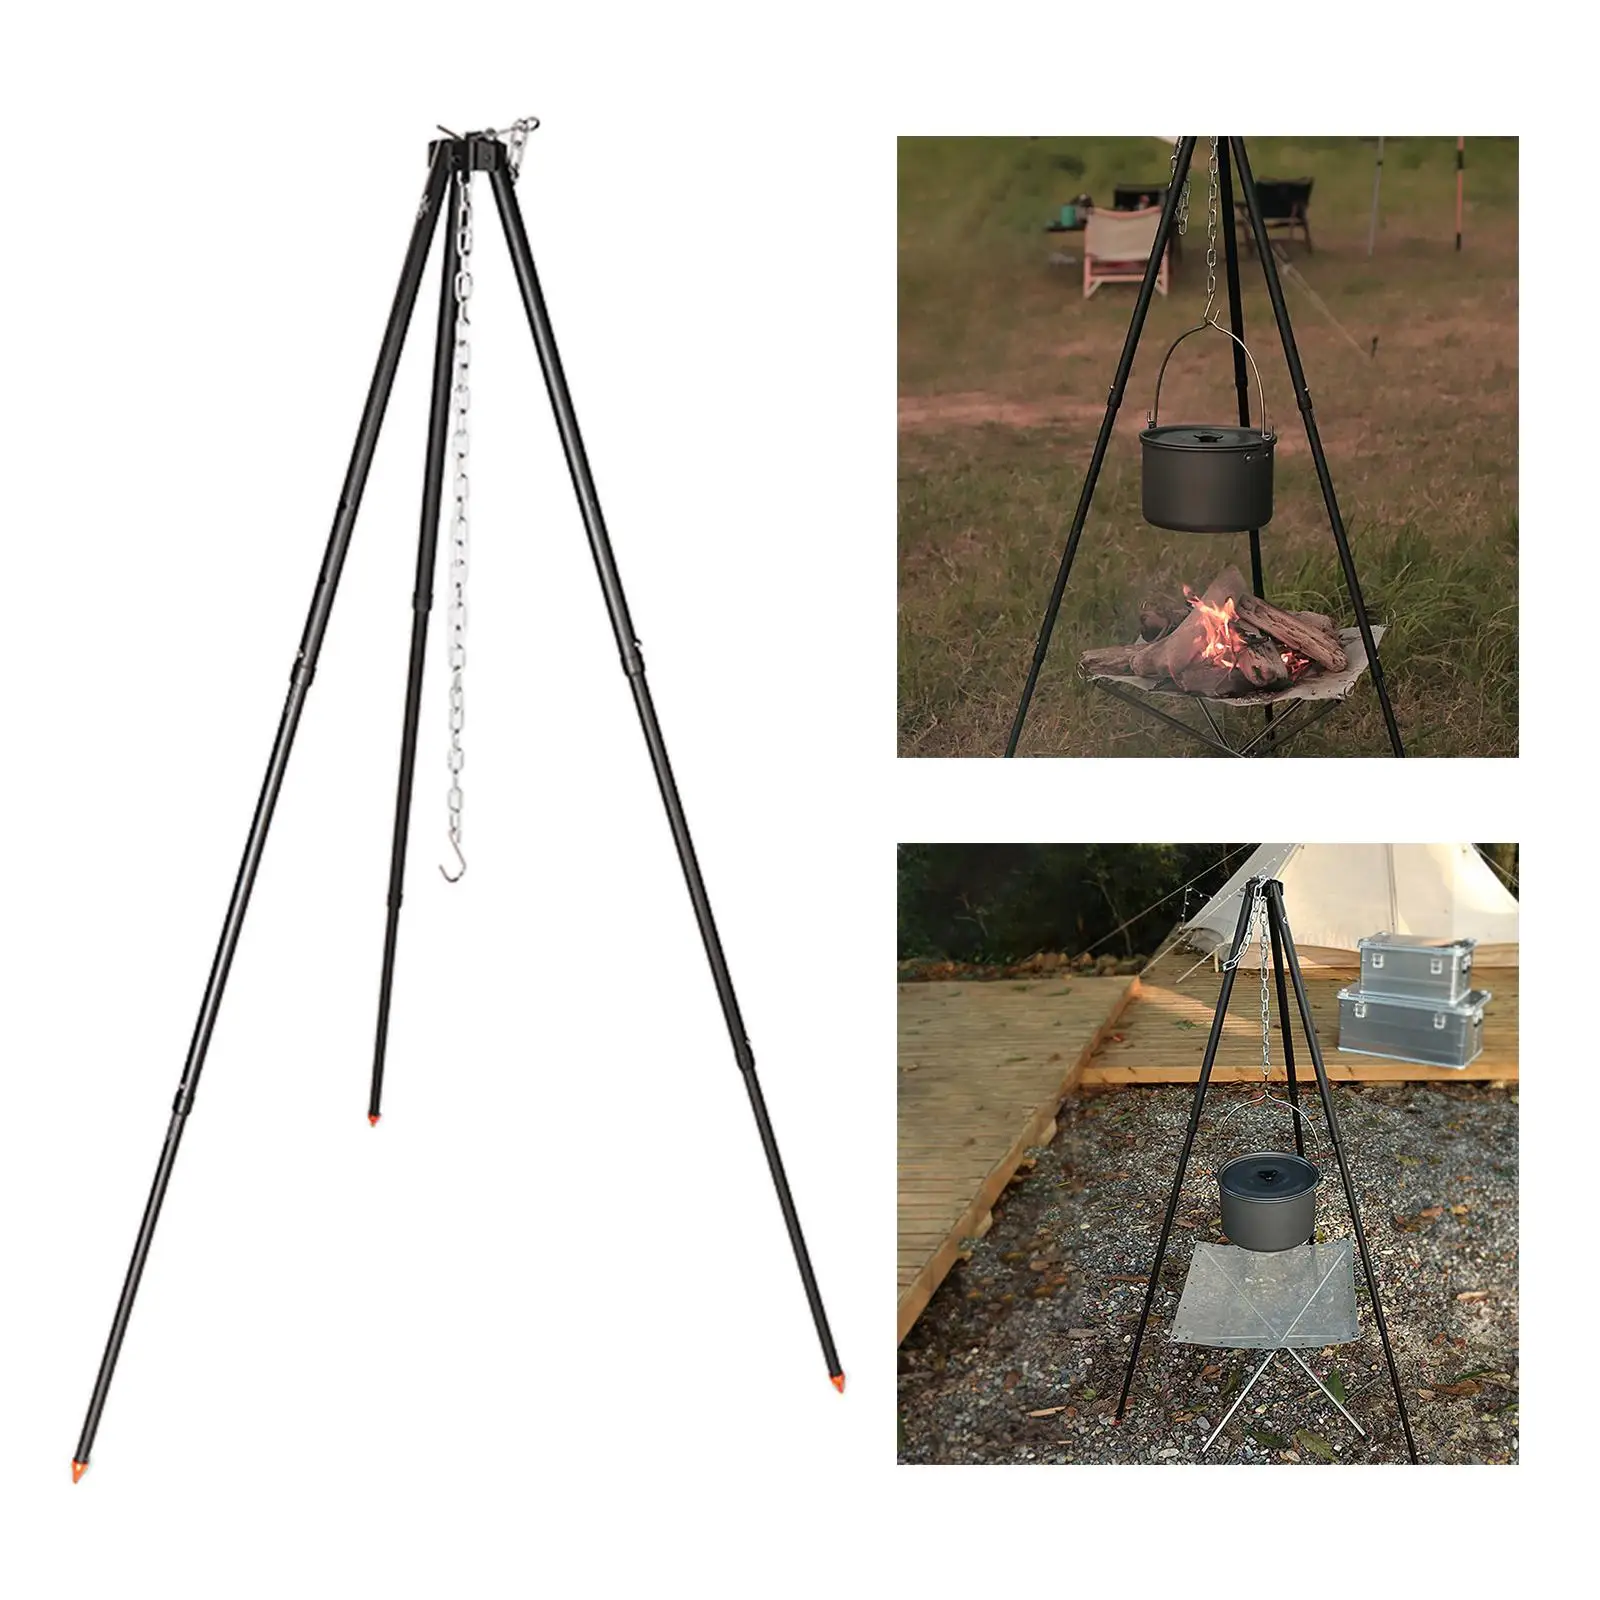 Pot Grill Durable Chain Campfire with Storage Bag Campfire Tripod for Cooking Grilling Set Camping Tripod for Outdoor Barbecue